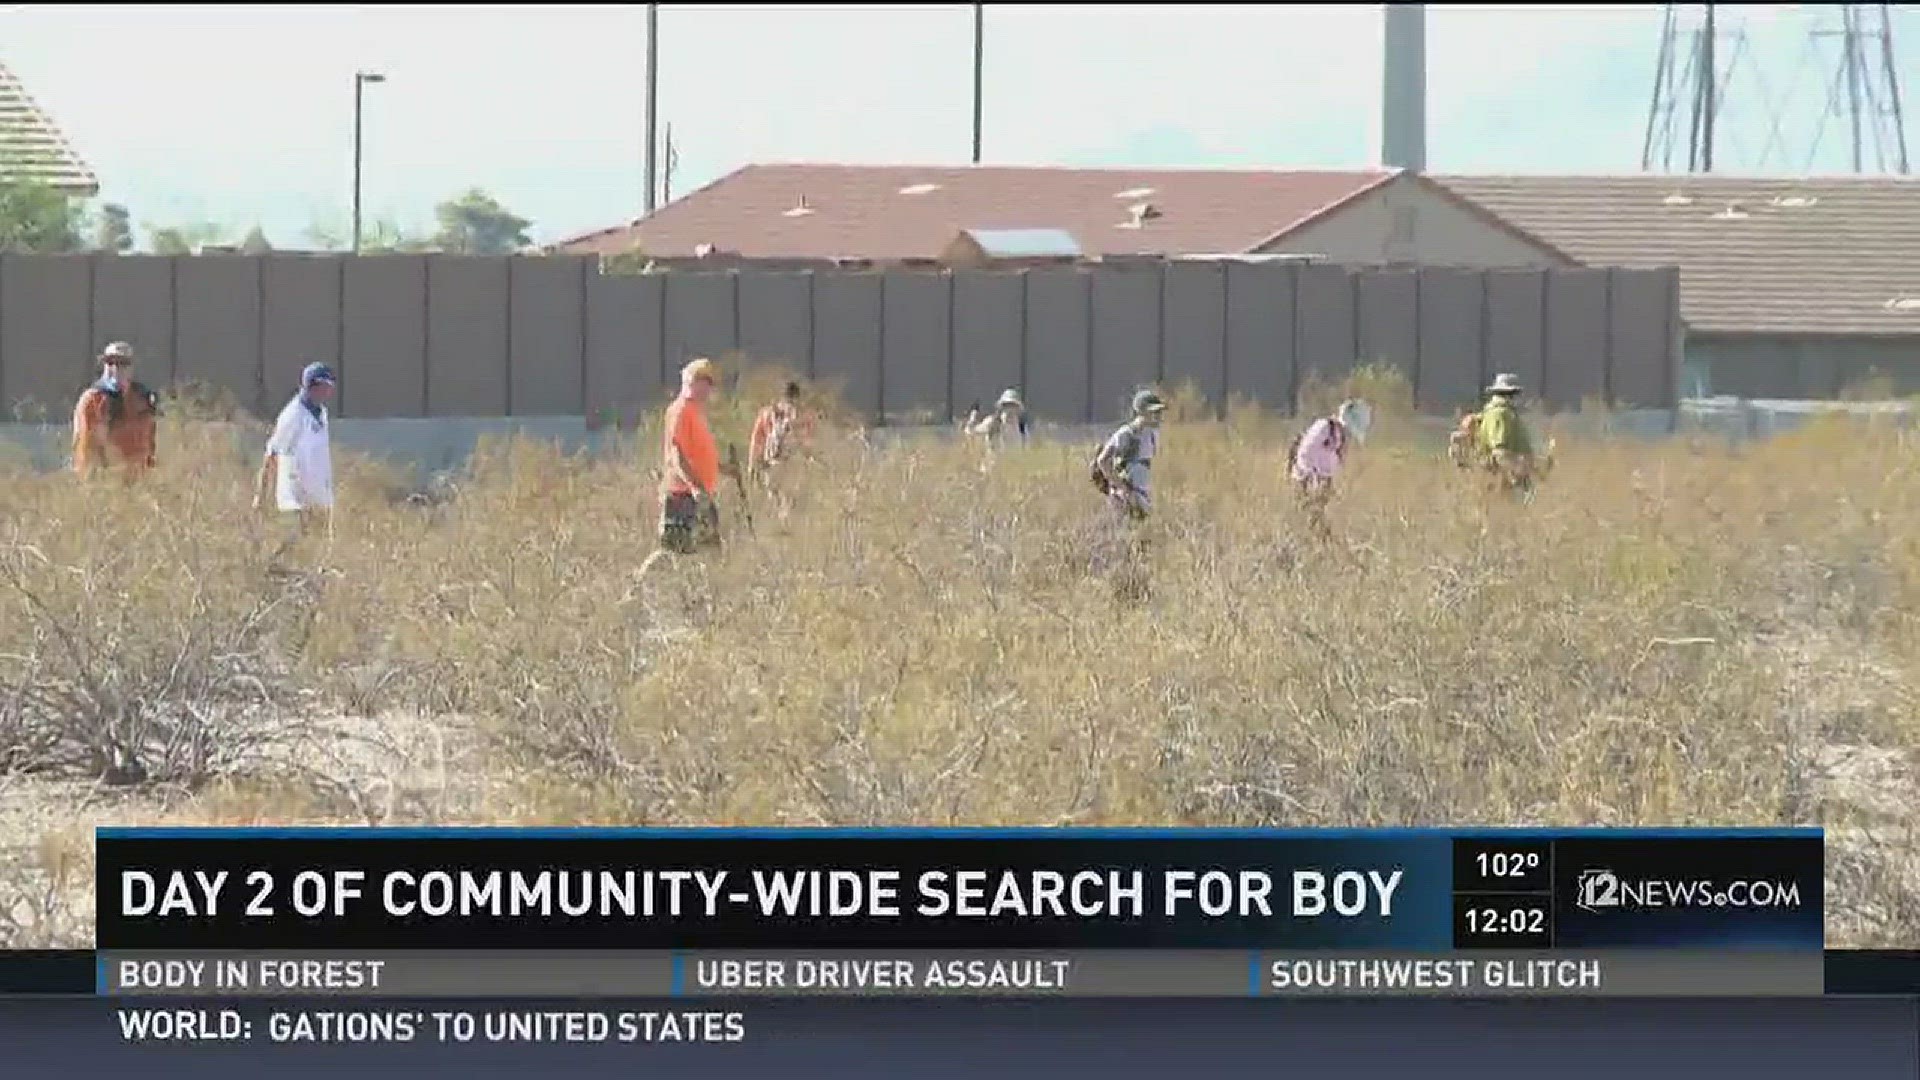 Authorities are exhausting every resource they have to find a missing 10-year-old boy.